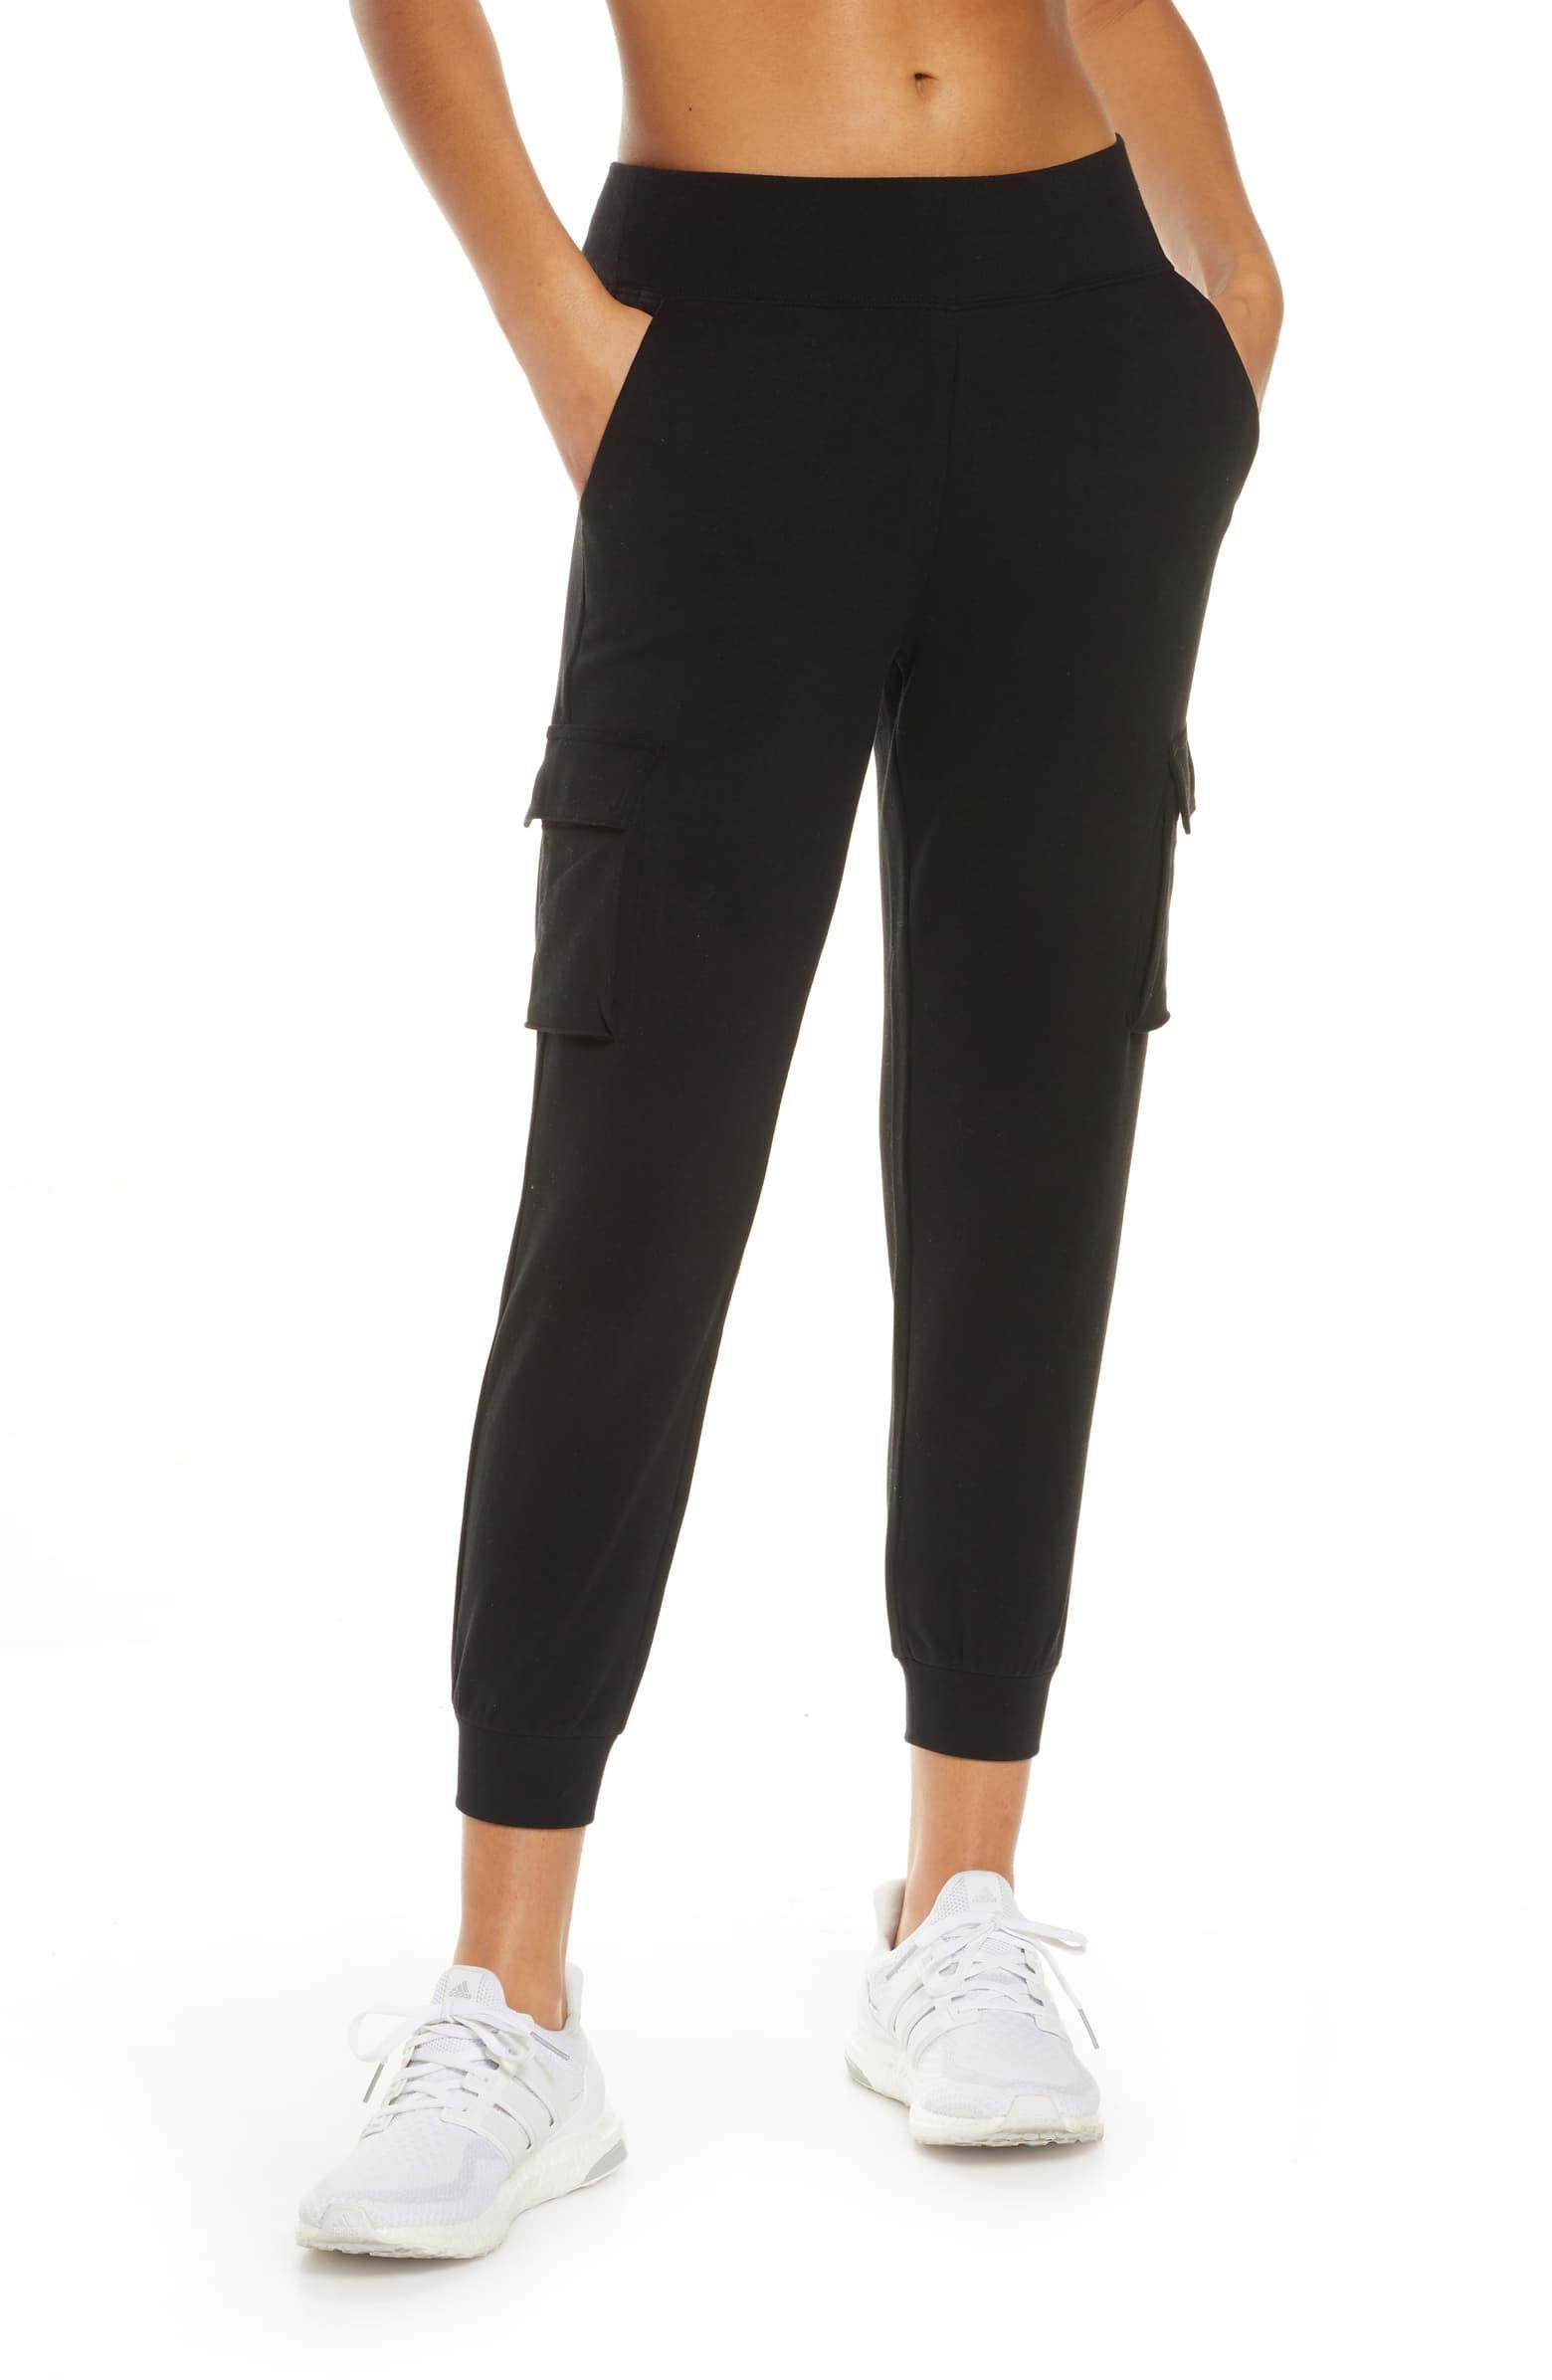 Buy > best high waisted sweatpants > in stock